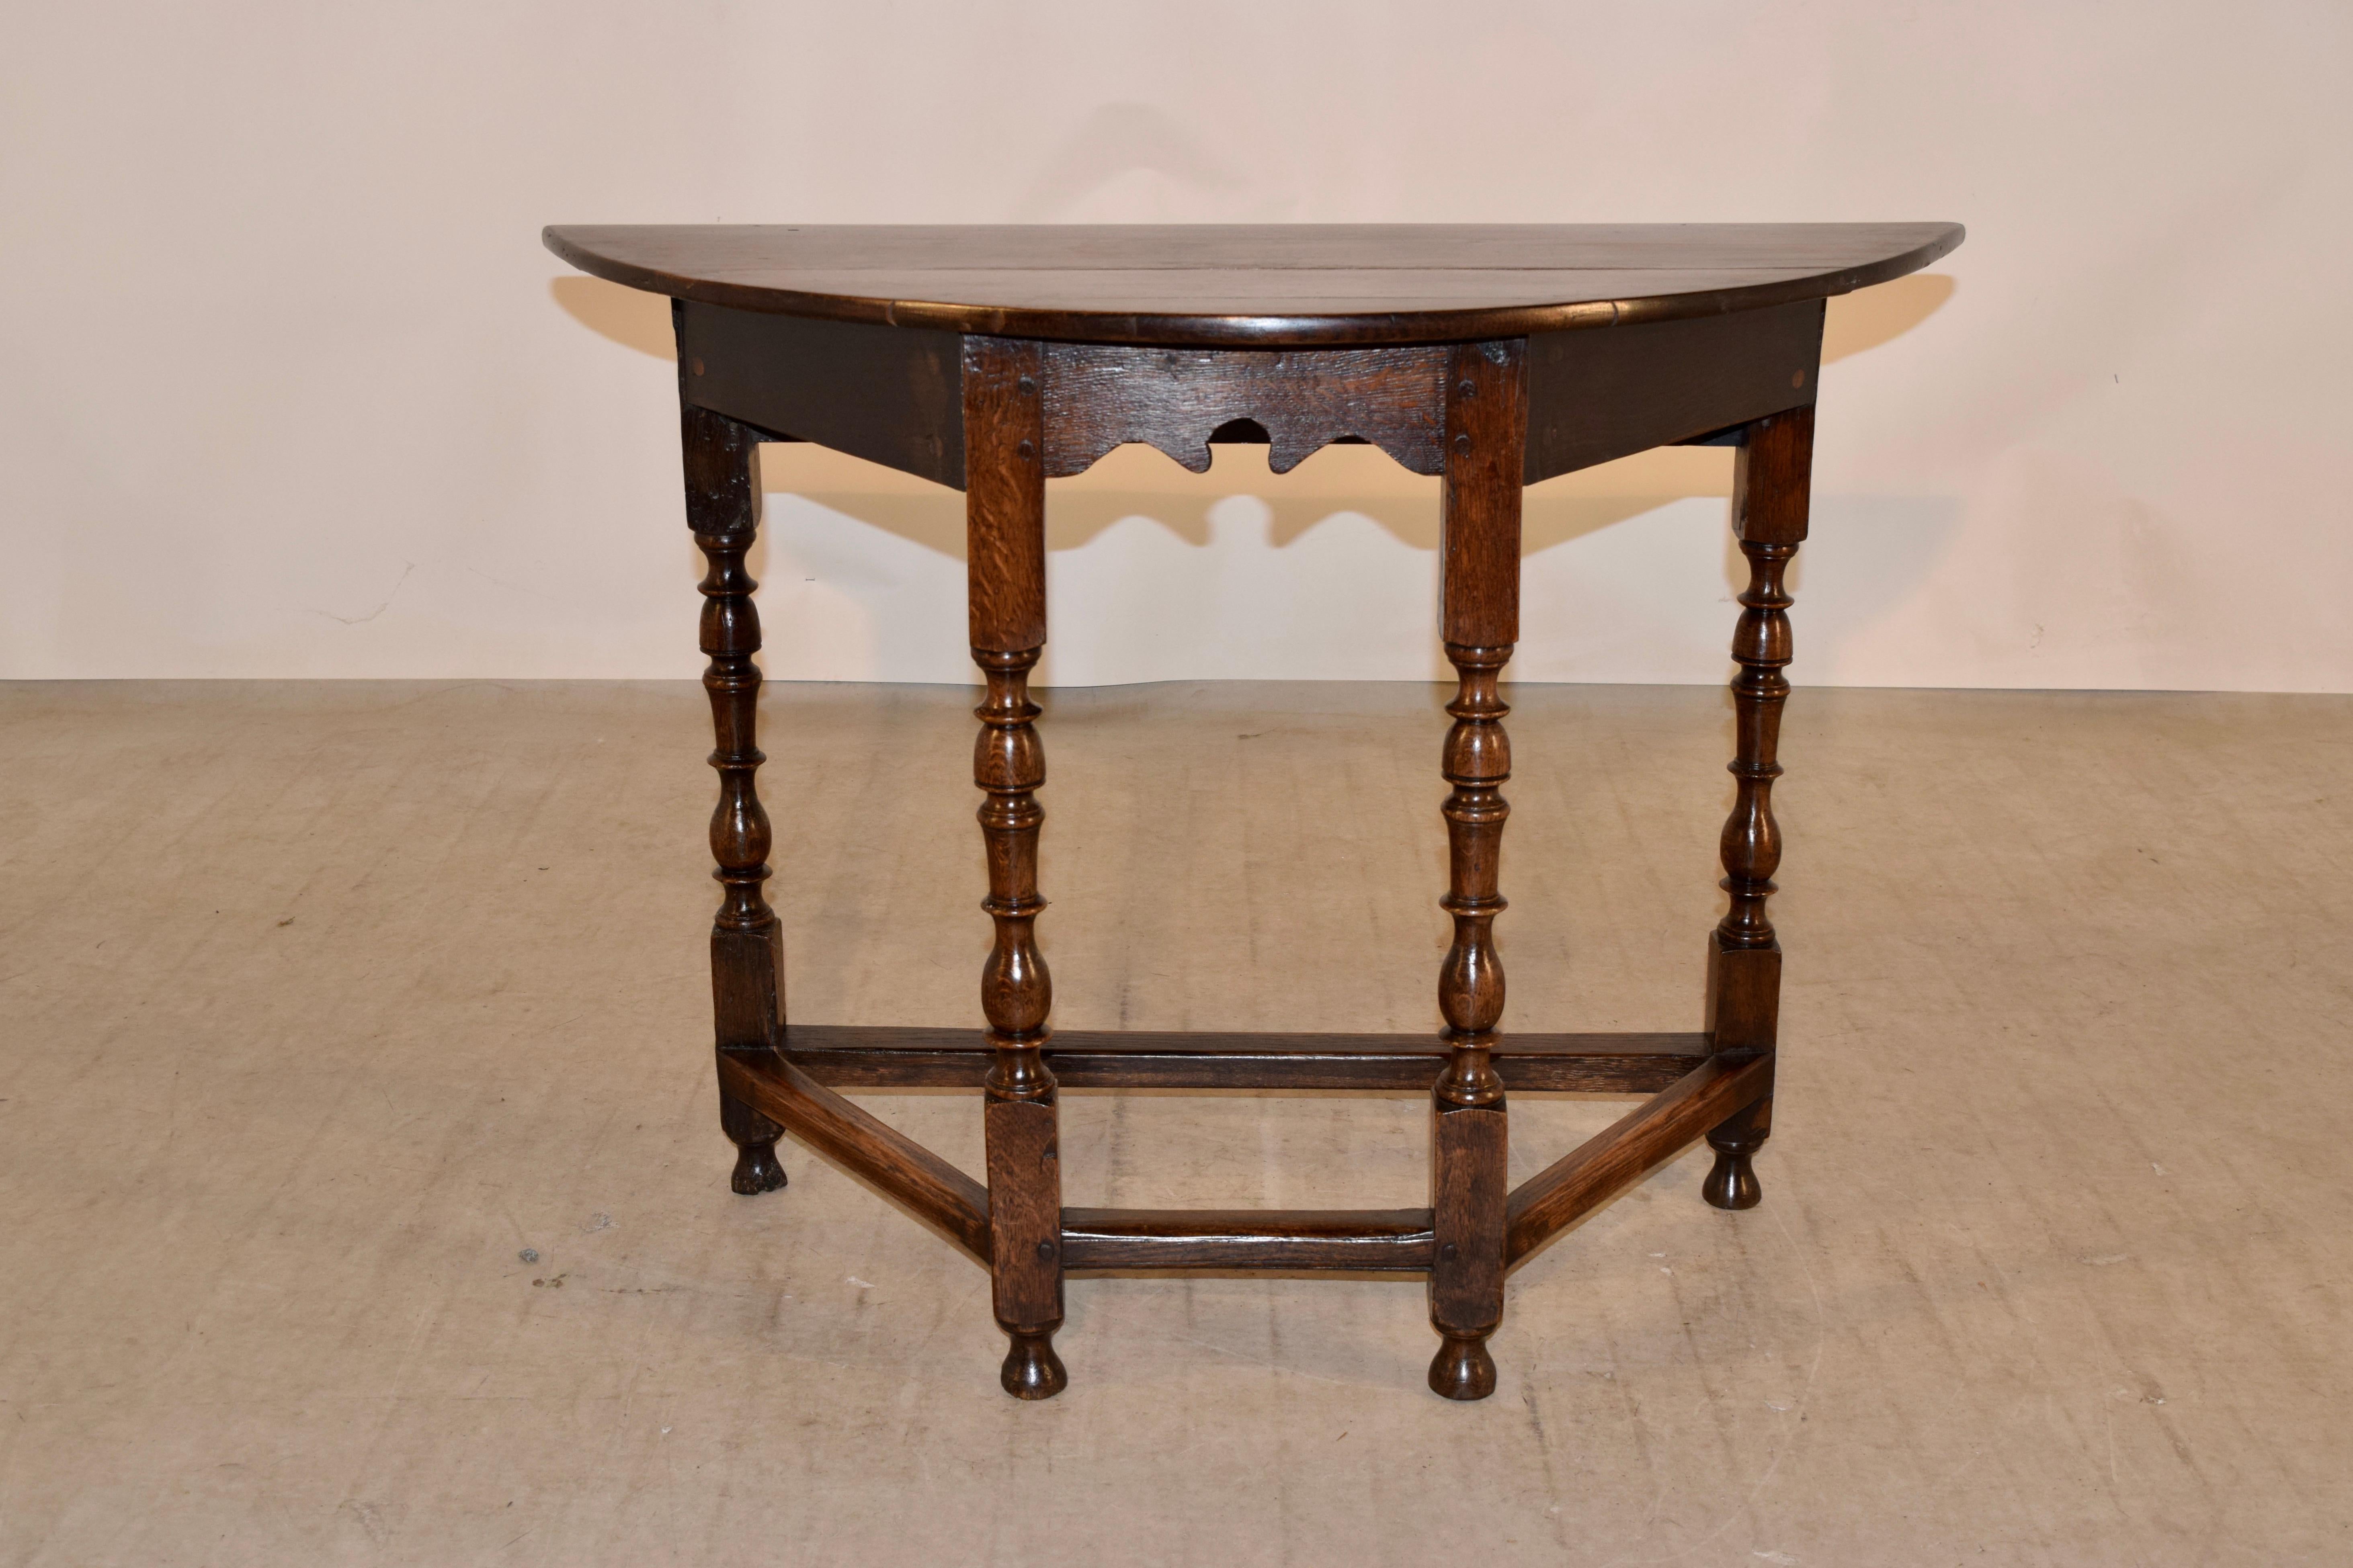 Turned 19th Century English Demilune Table